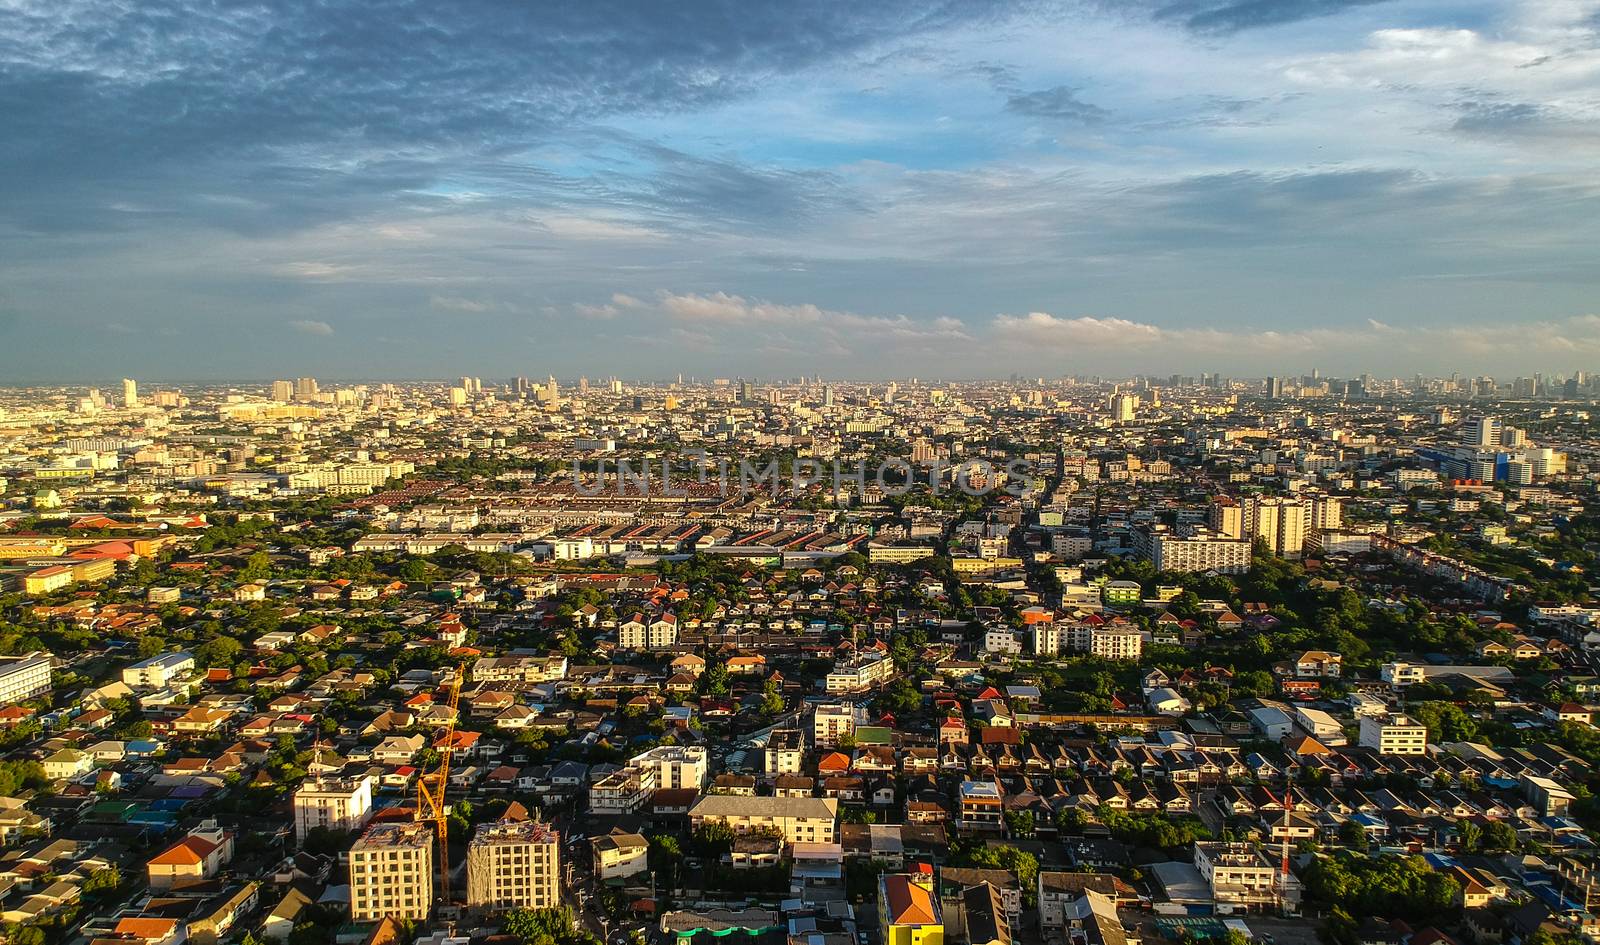 Panorama view of bangkok city Thailand in Aerial view at evening light, Bangkok is the capital and most populous city of Thailand.